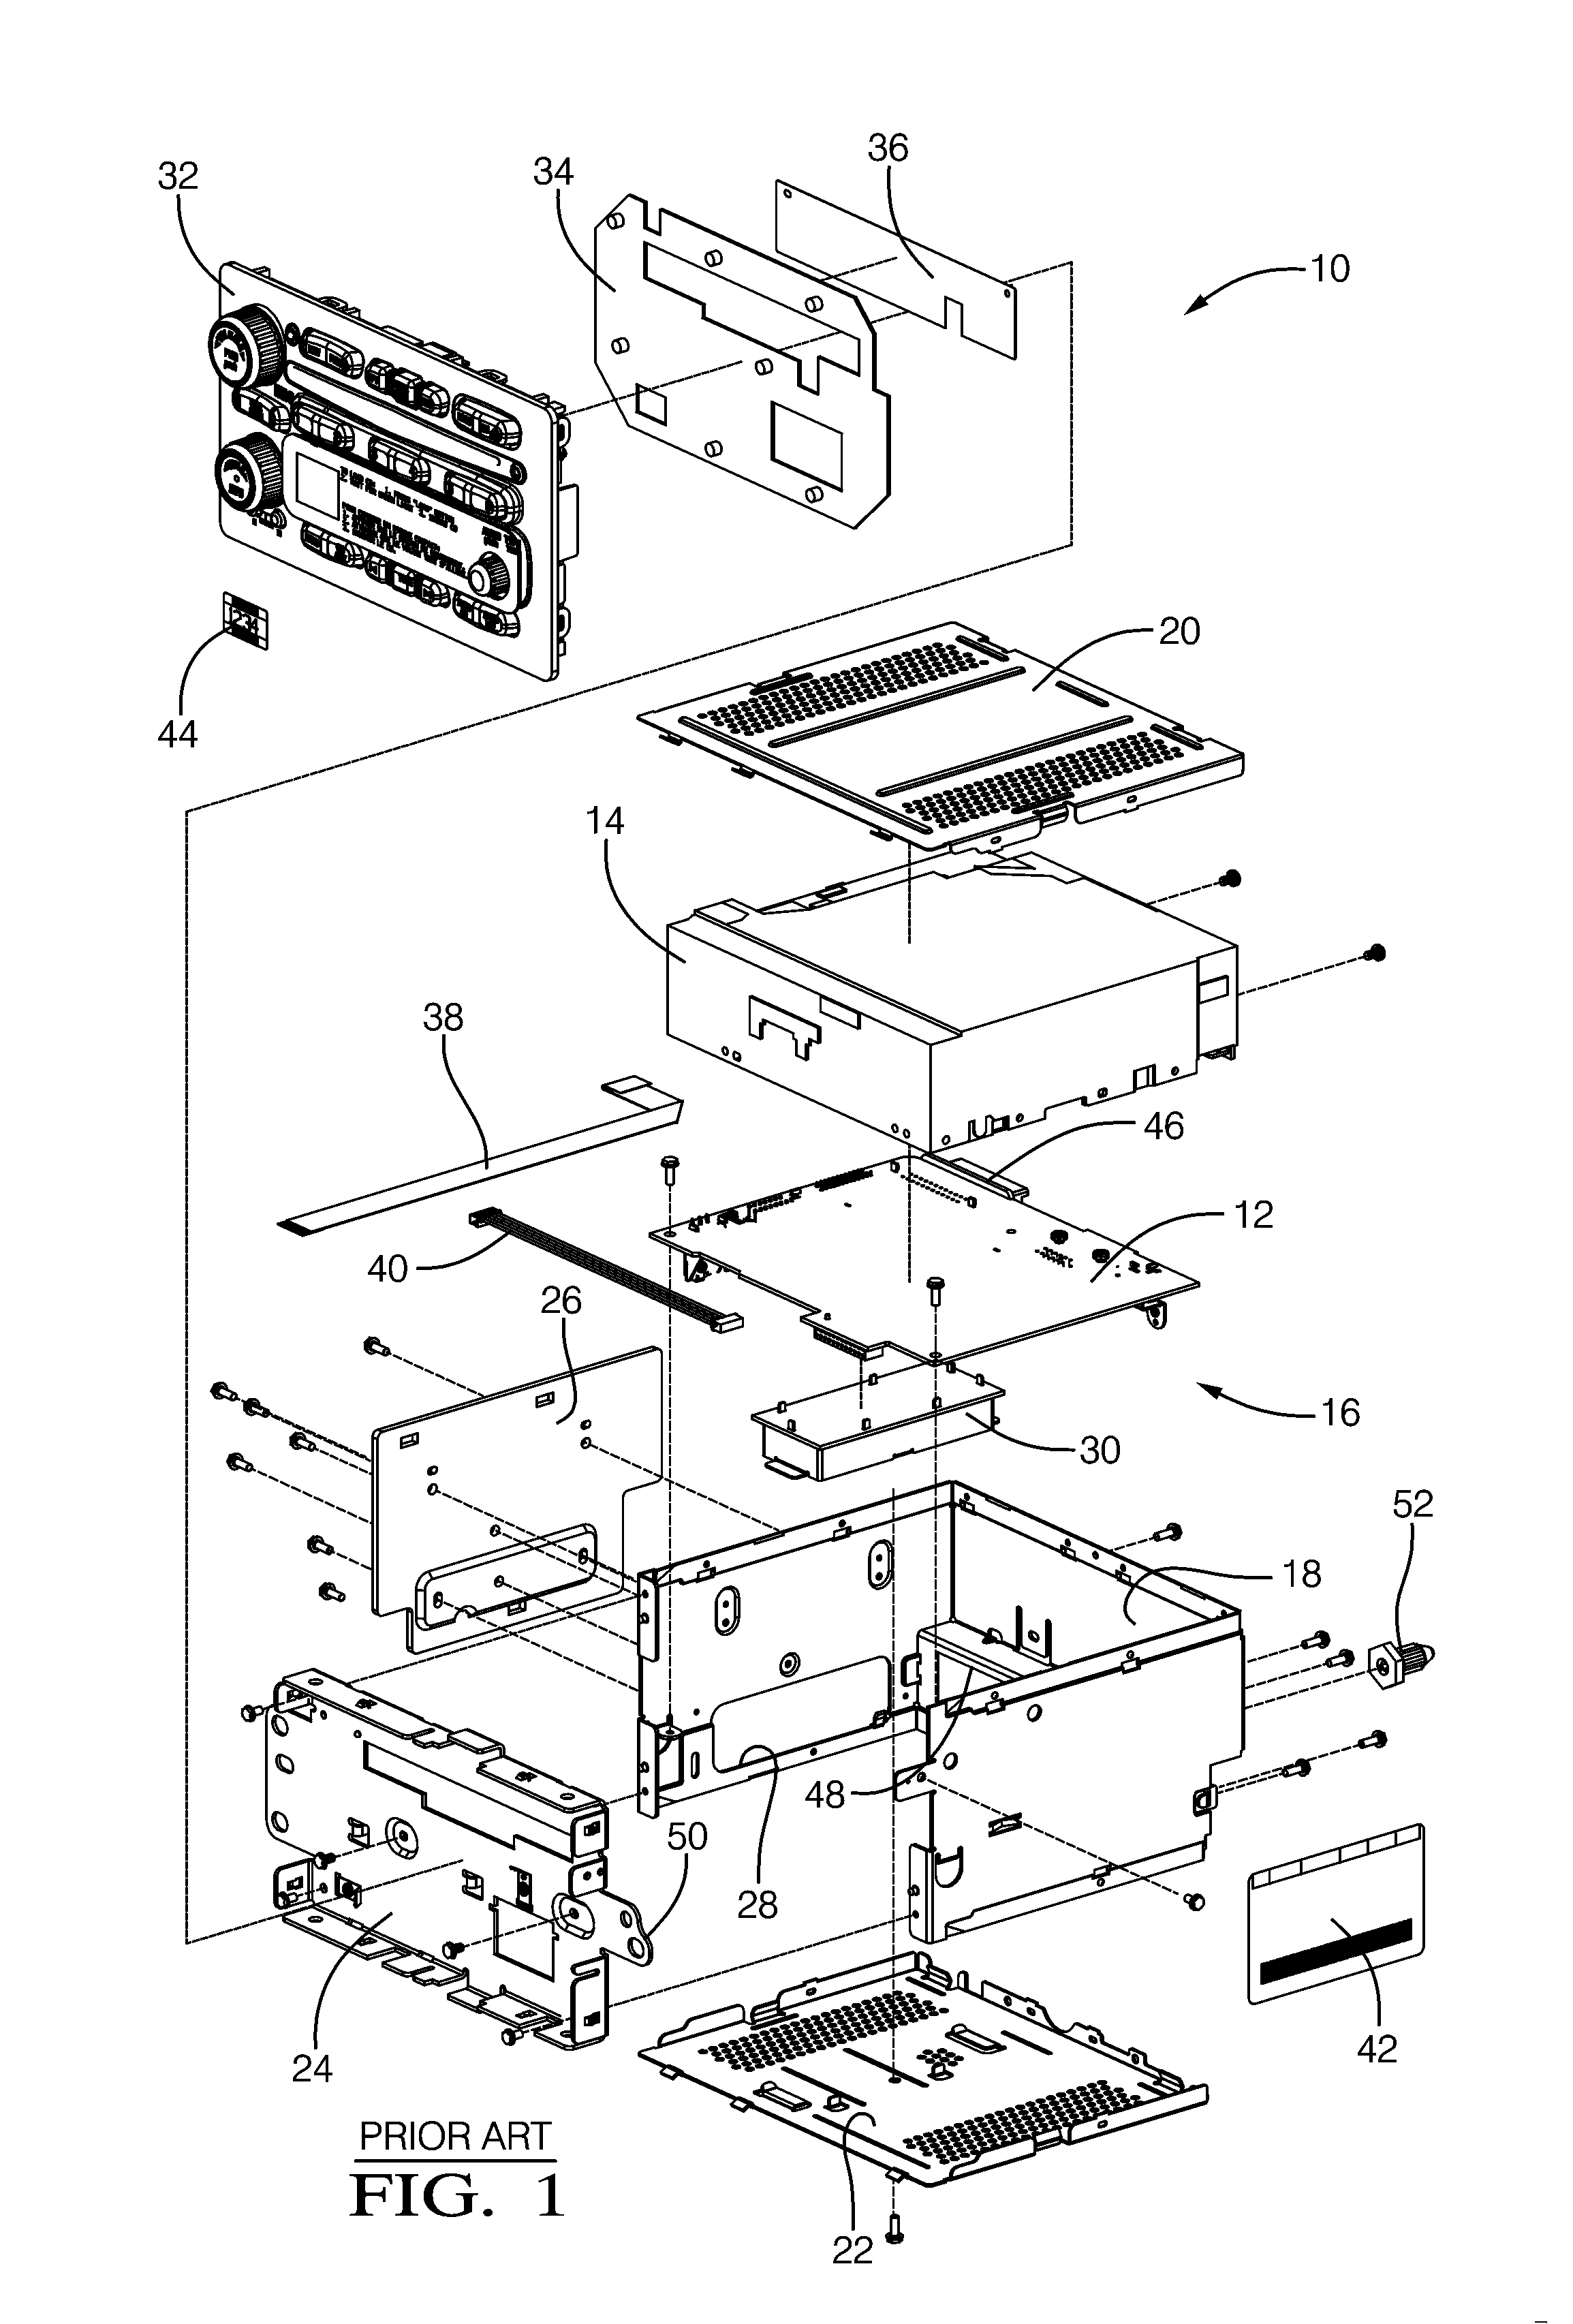 Flexible electronic circuit enclosure assembly